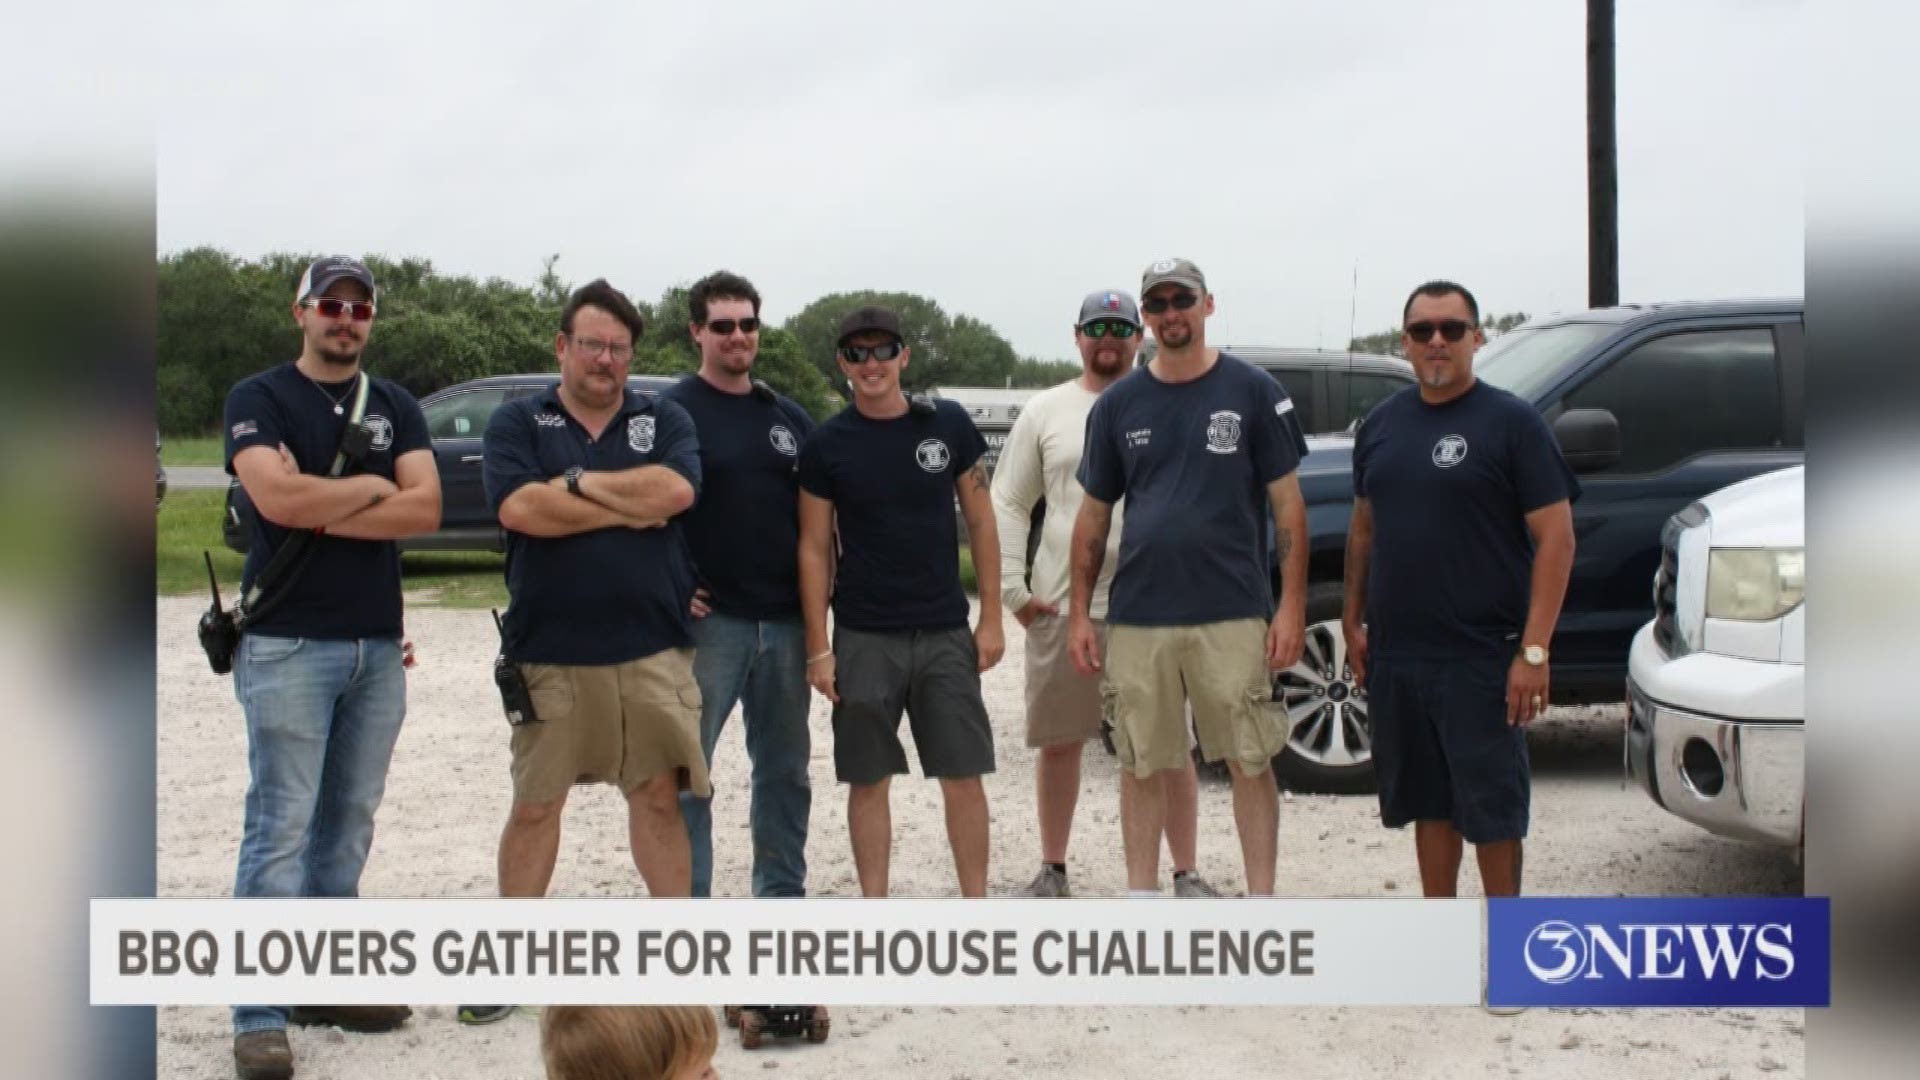 IFD teamed up with the Aransas Moose Lodge for the event